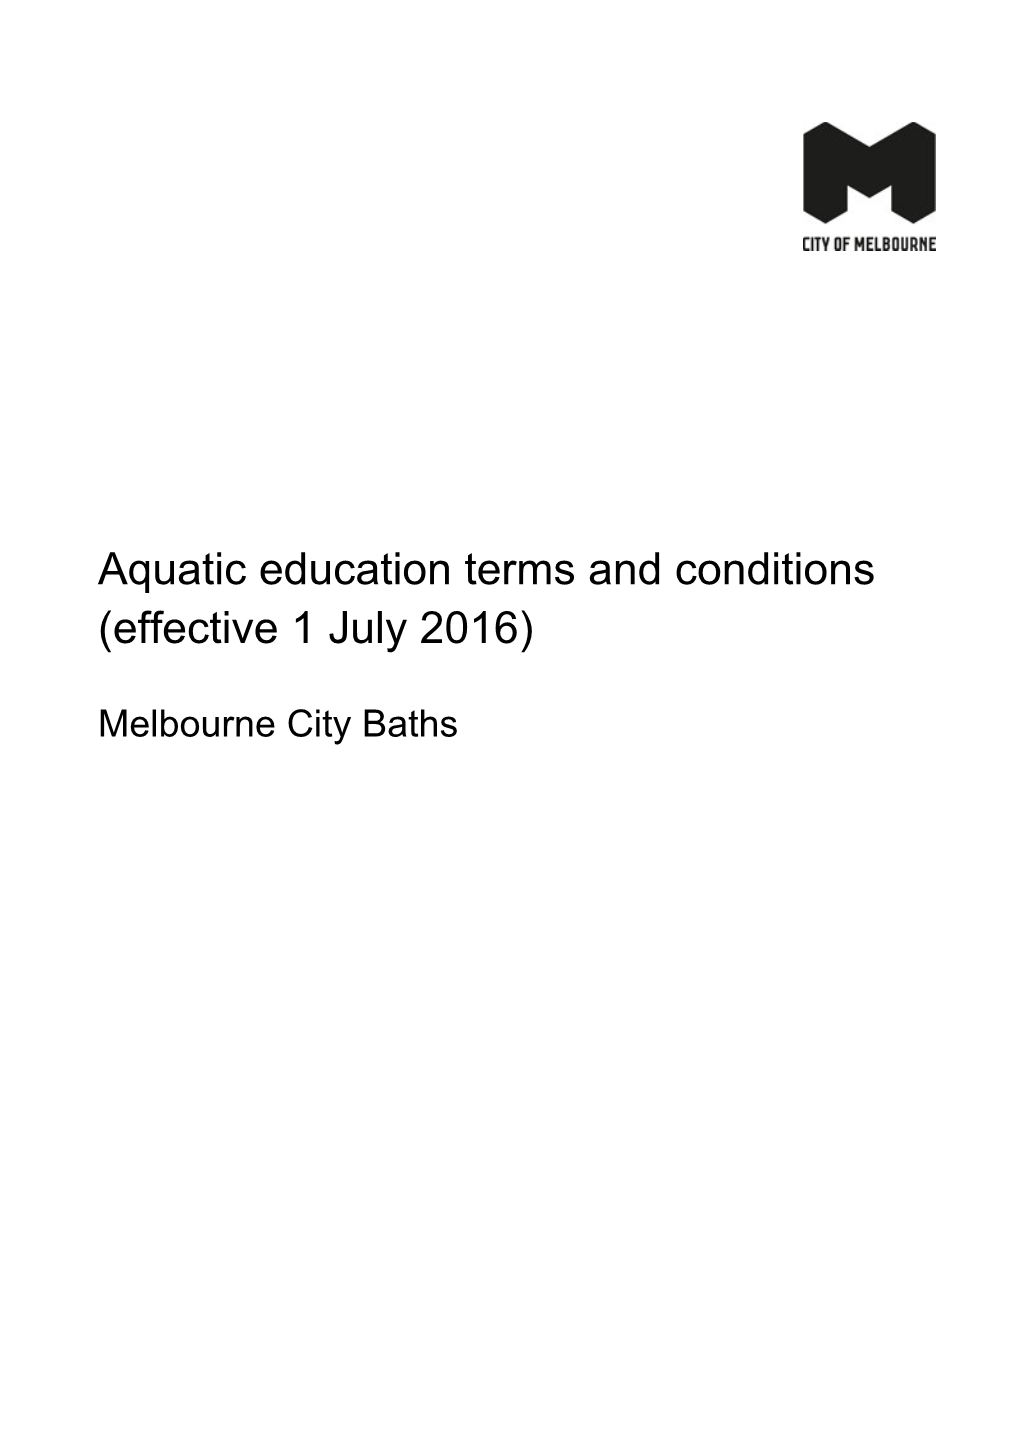 MCB Aquatic Education Terms and Conditions